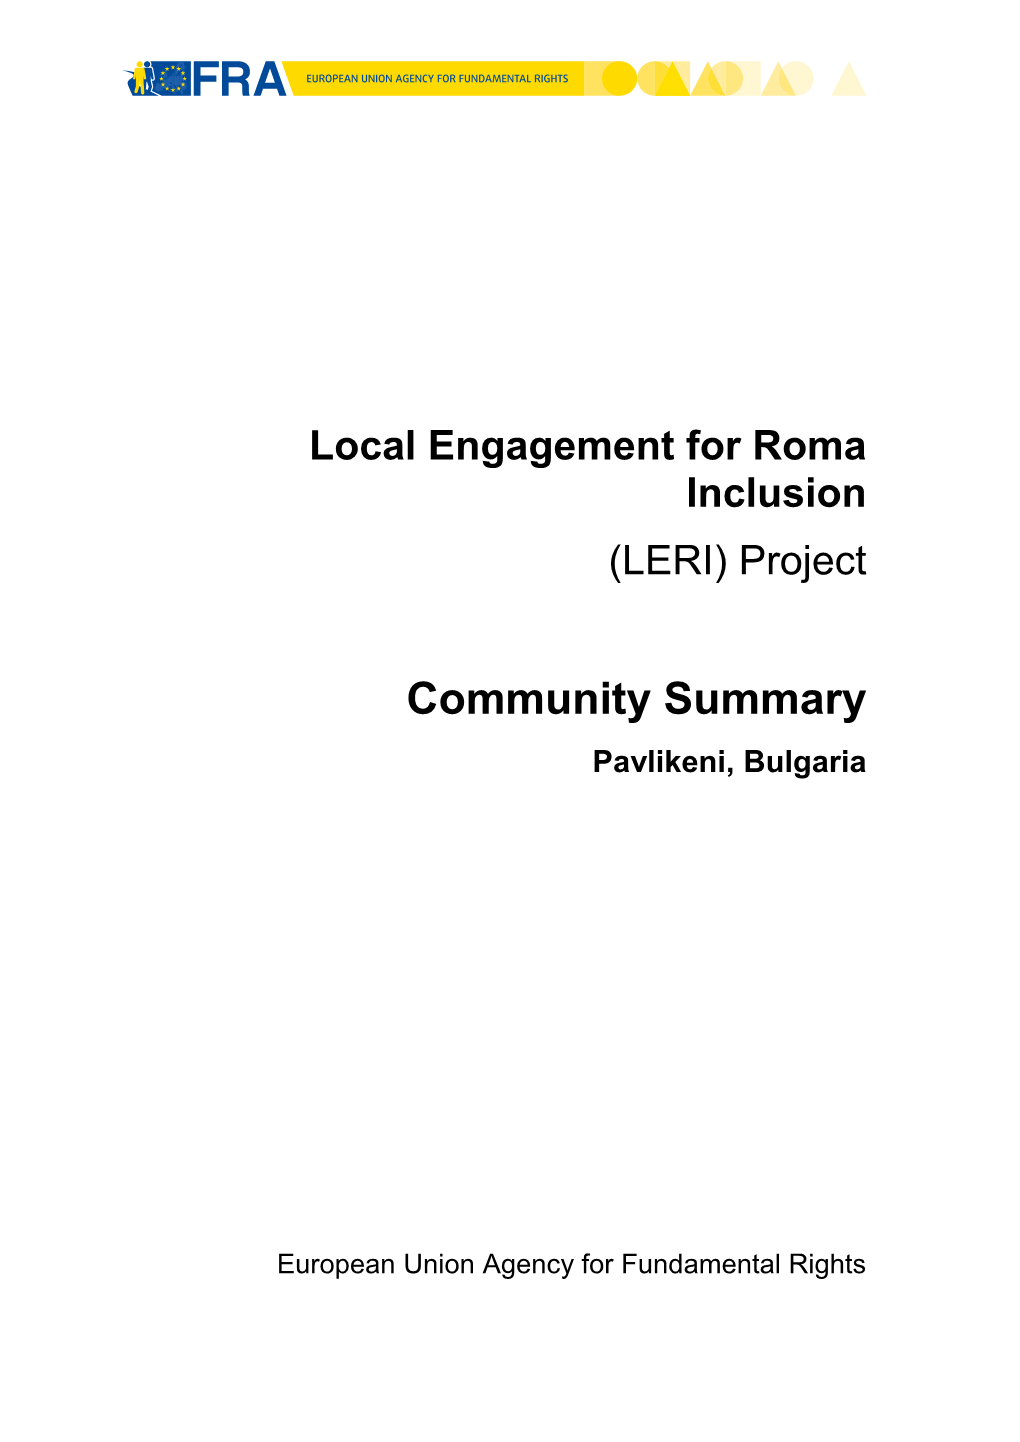 Local Engagement for Roma Inclusion (LERI) Project